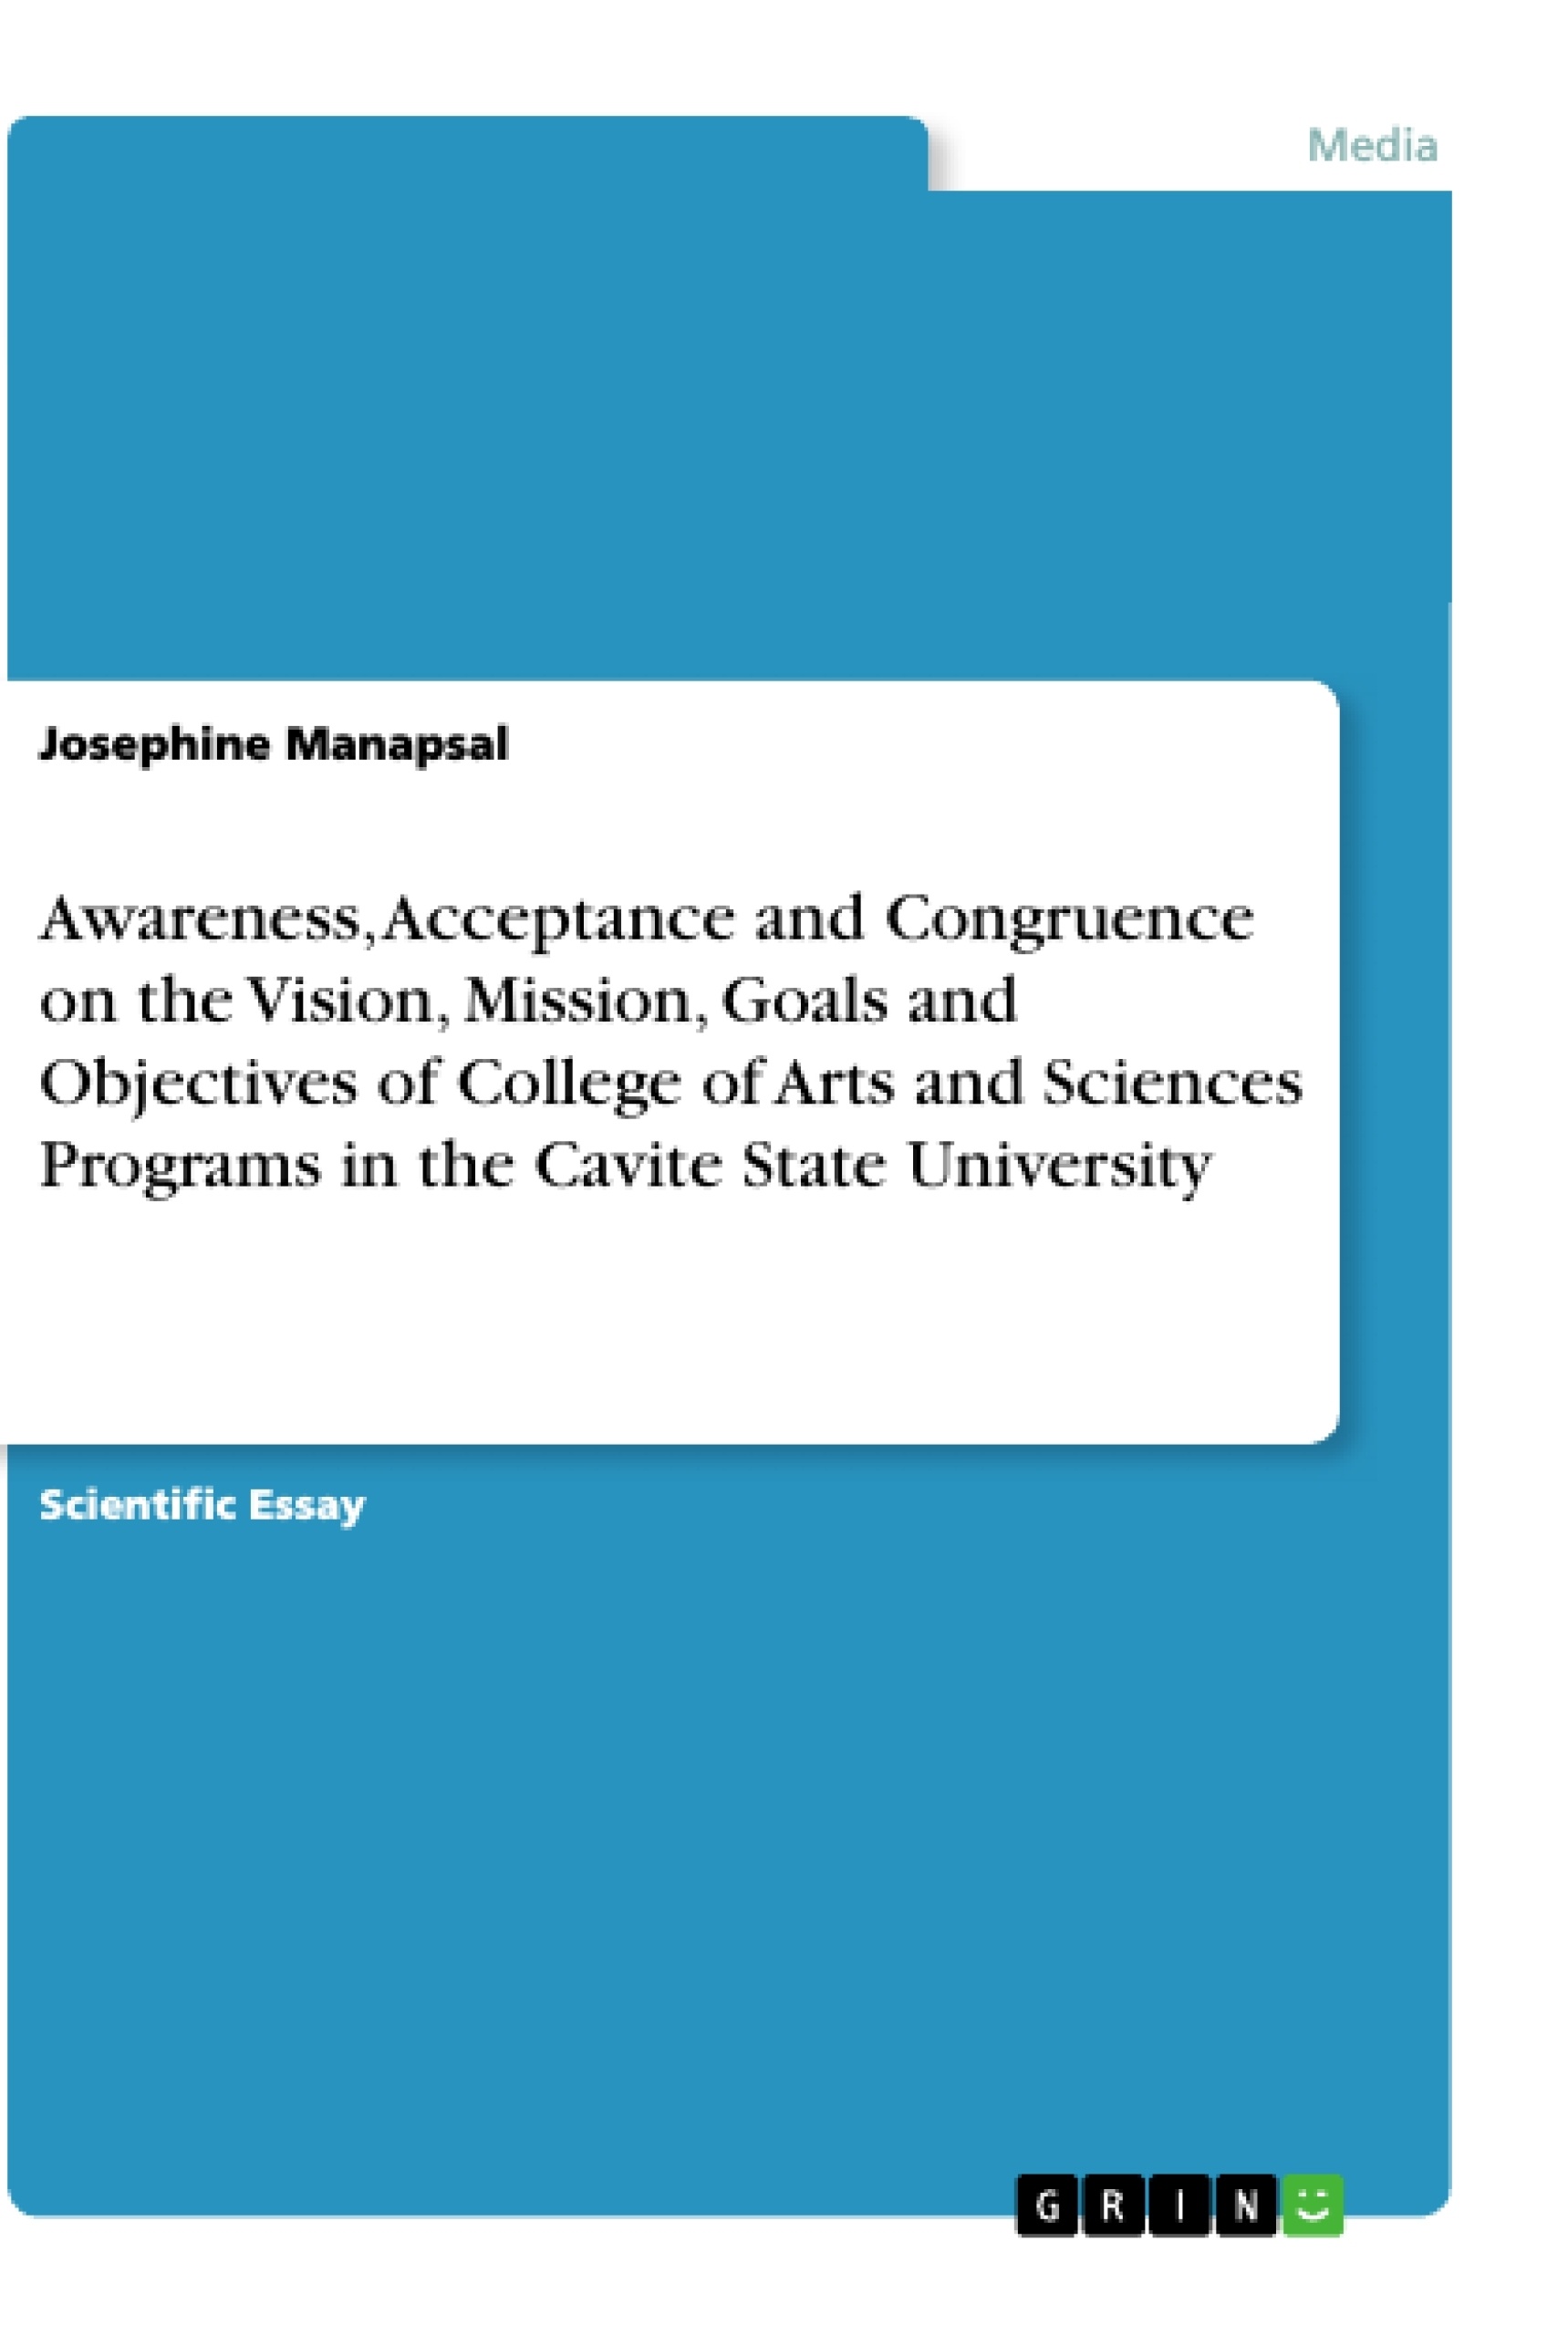 Titel: Awareness, Acceptance and Congruence on the Vision, Mission, Goals and Objectives of College of Arts and Sciences Programs in the Cavite State University